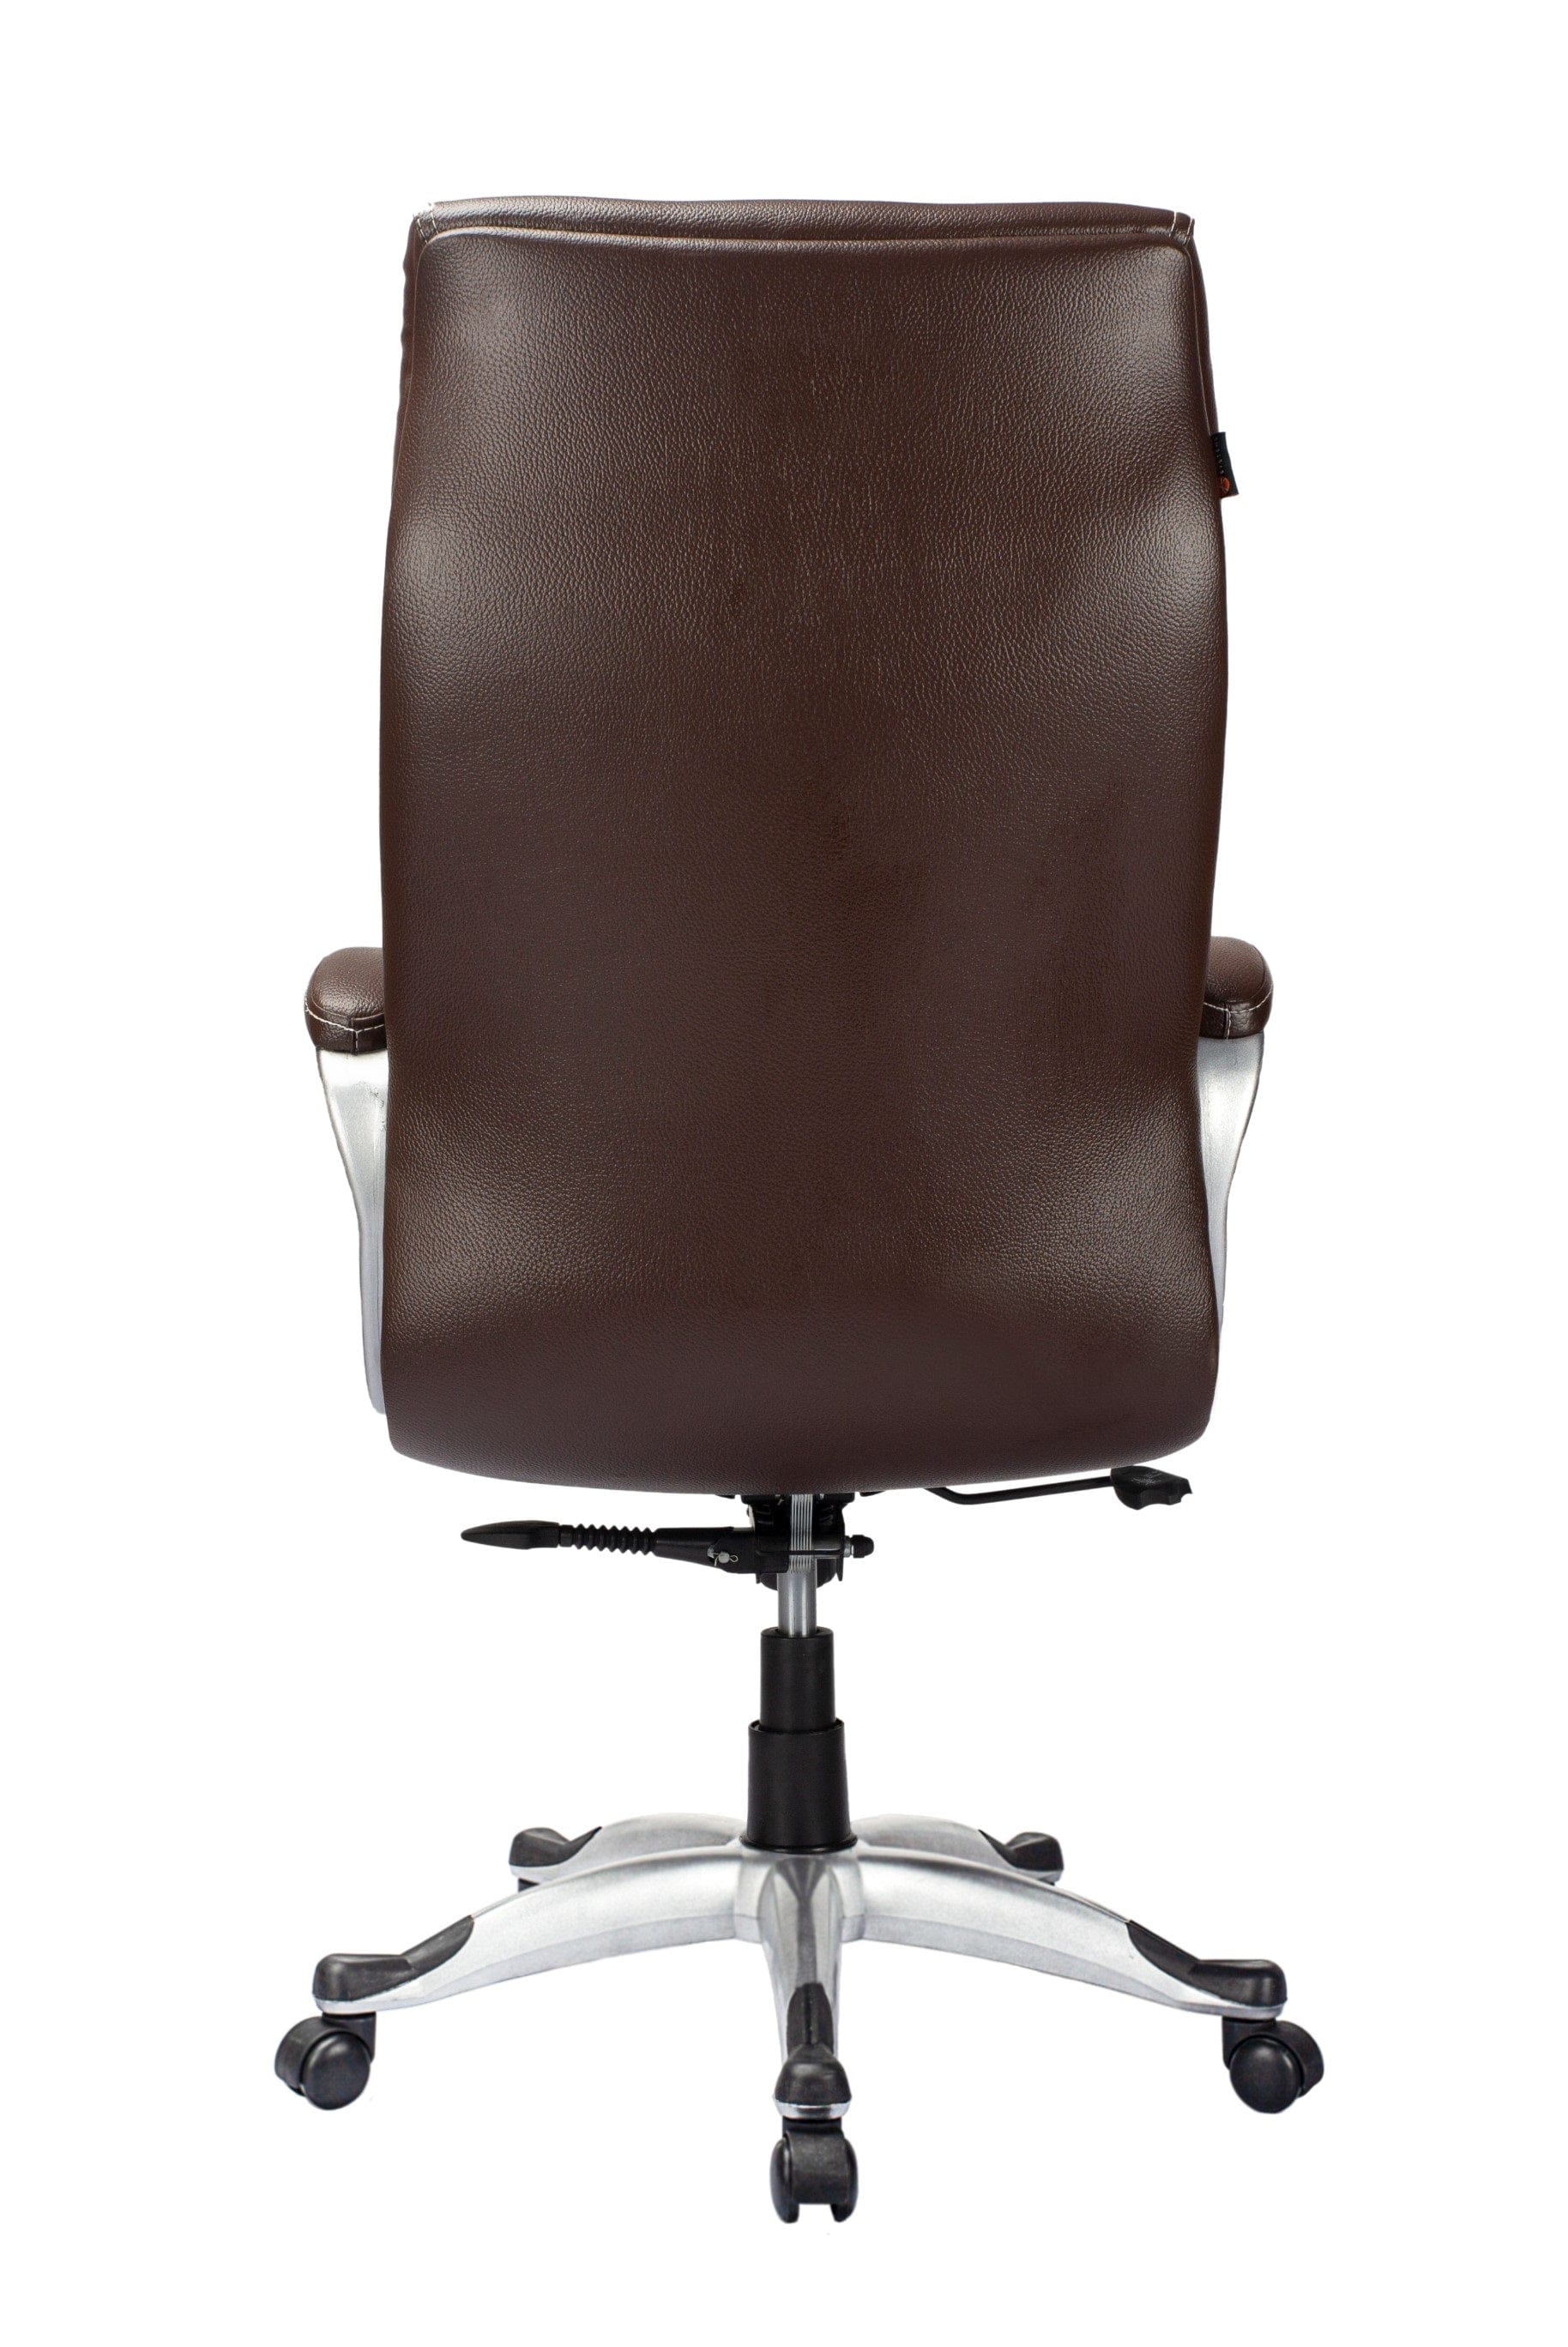 Adiko High Back Exceutive Chair in Brown